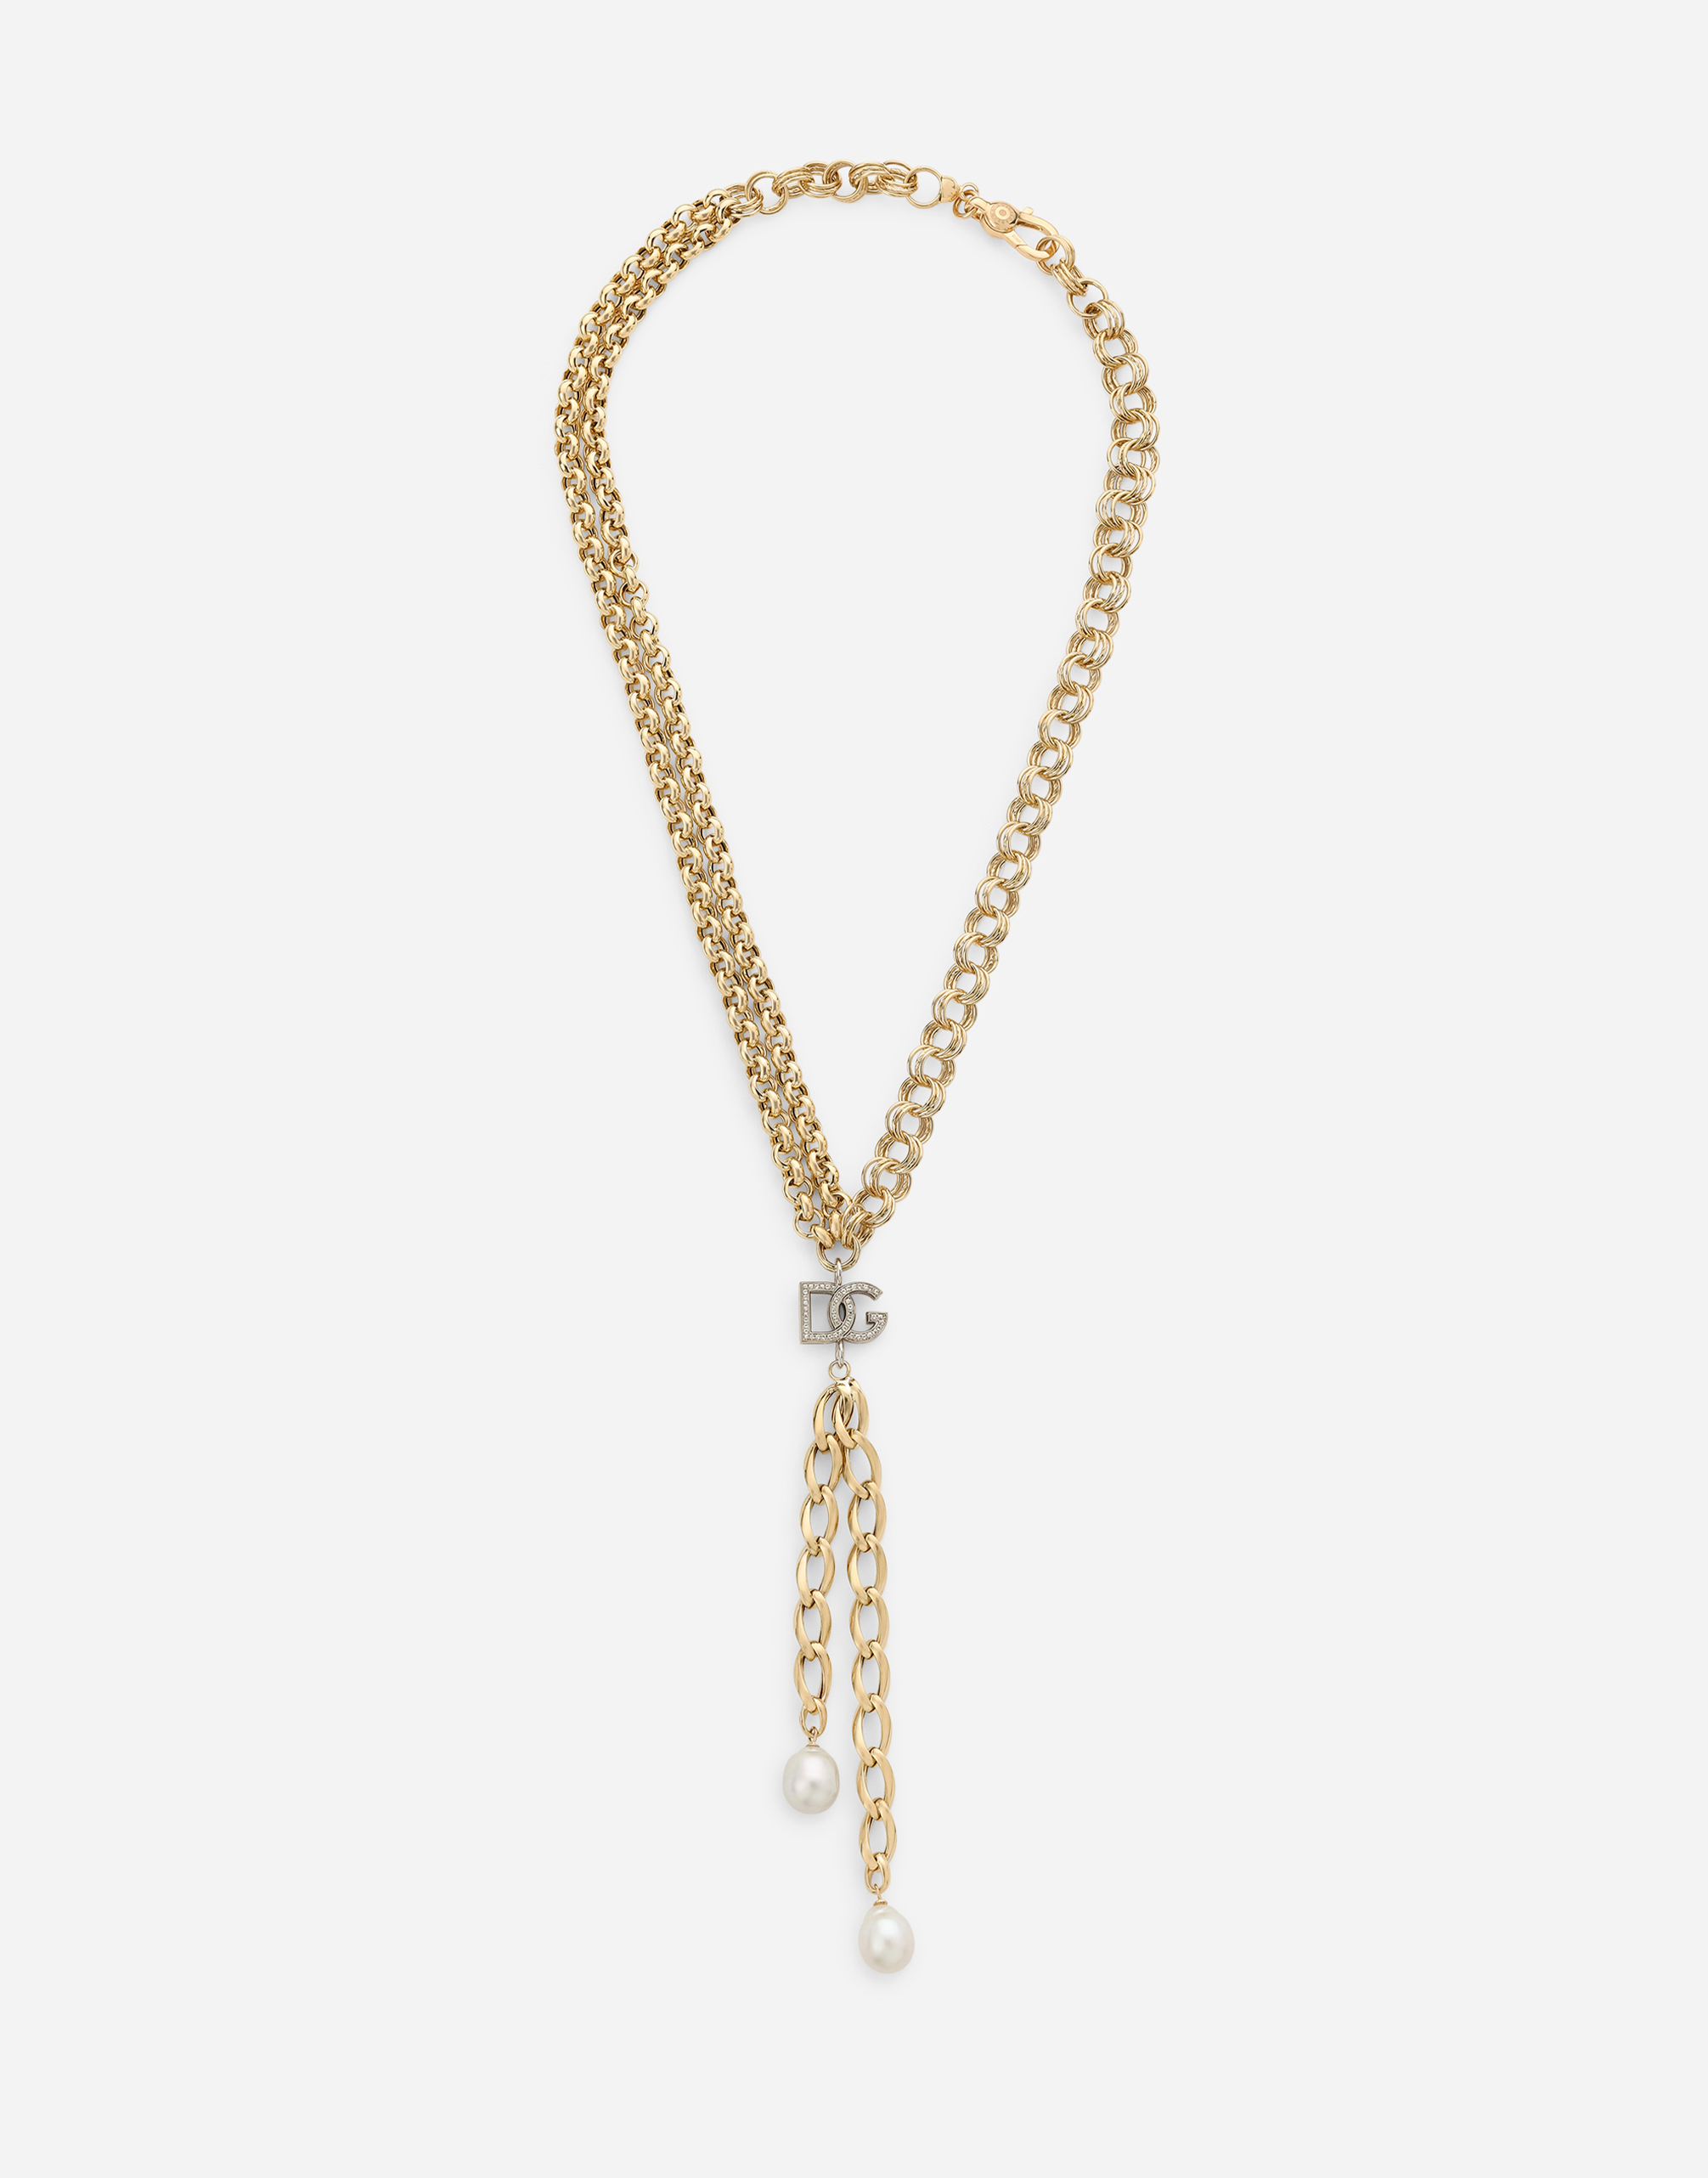 Logo necklace in yellow and white 18kt gold with colorless sapphires and pearls in White and yellow gold